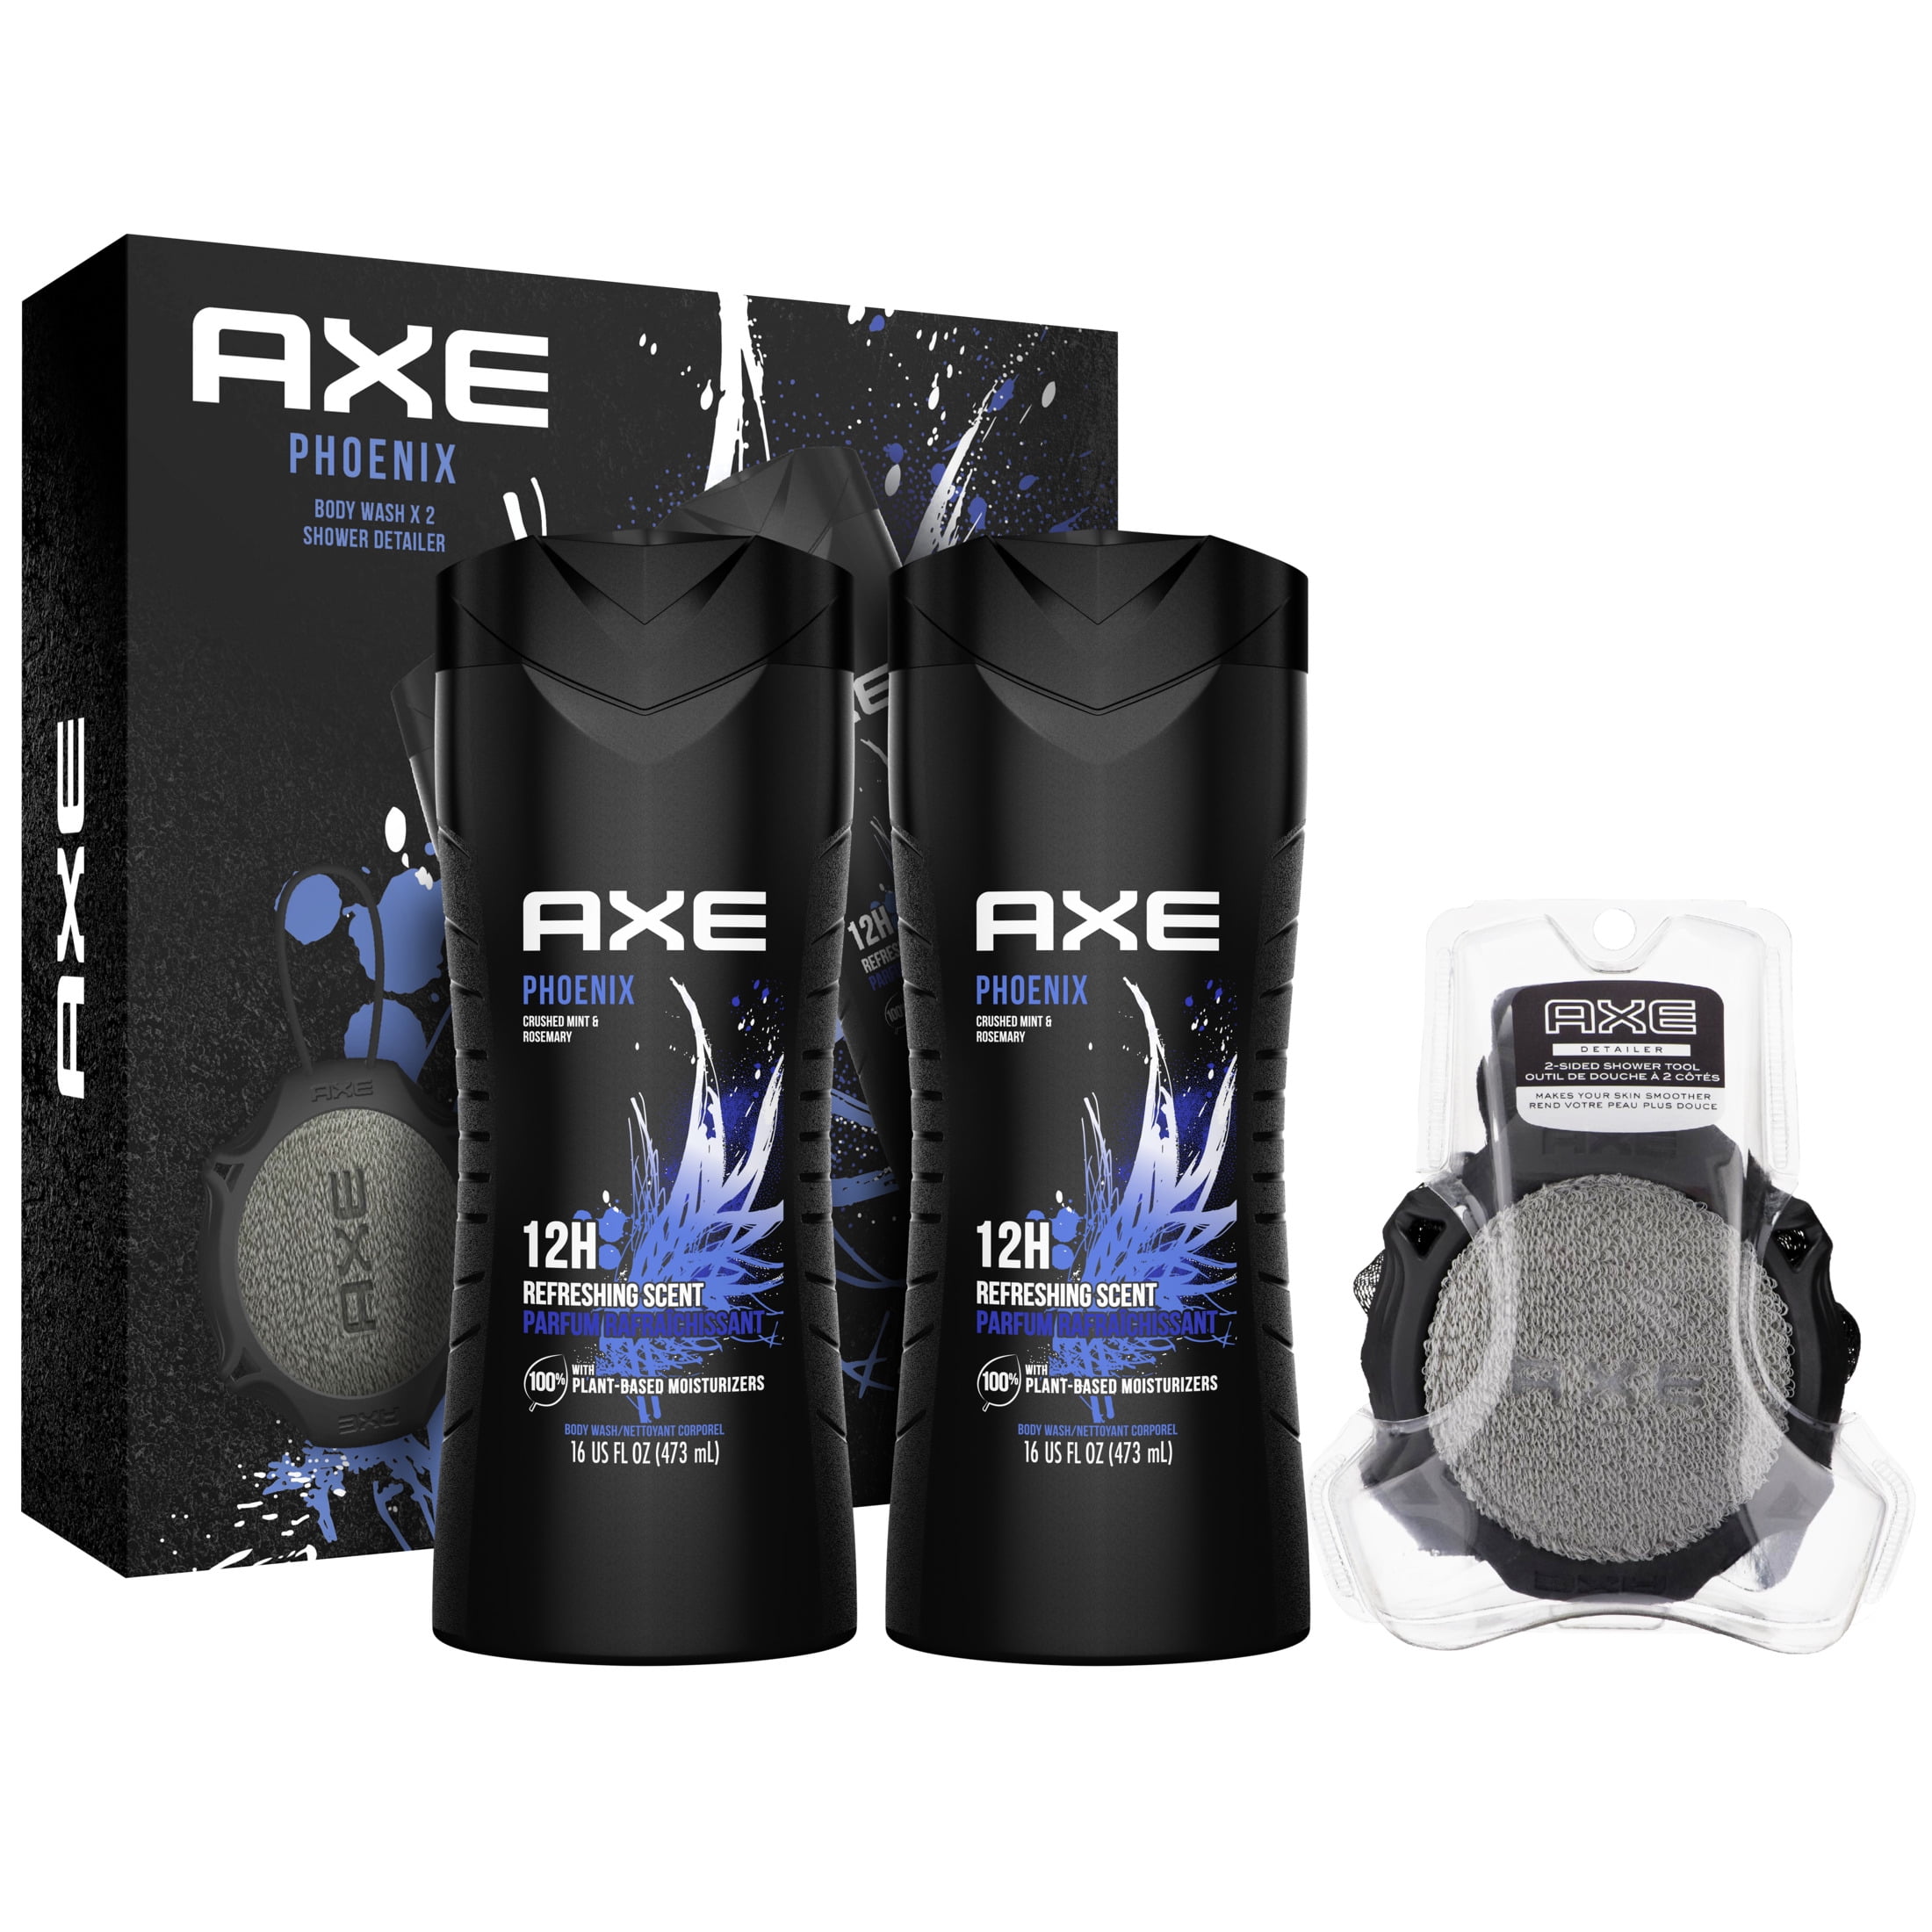 ($14 VALUE) AXE Phoenix Body Wash Gift Set With Shower Tool, 3 Pack